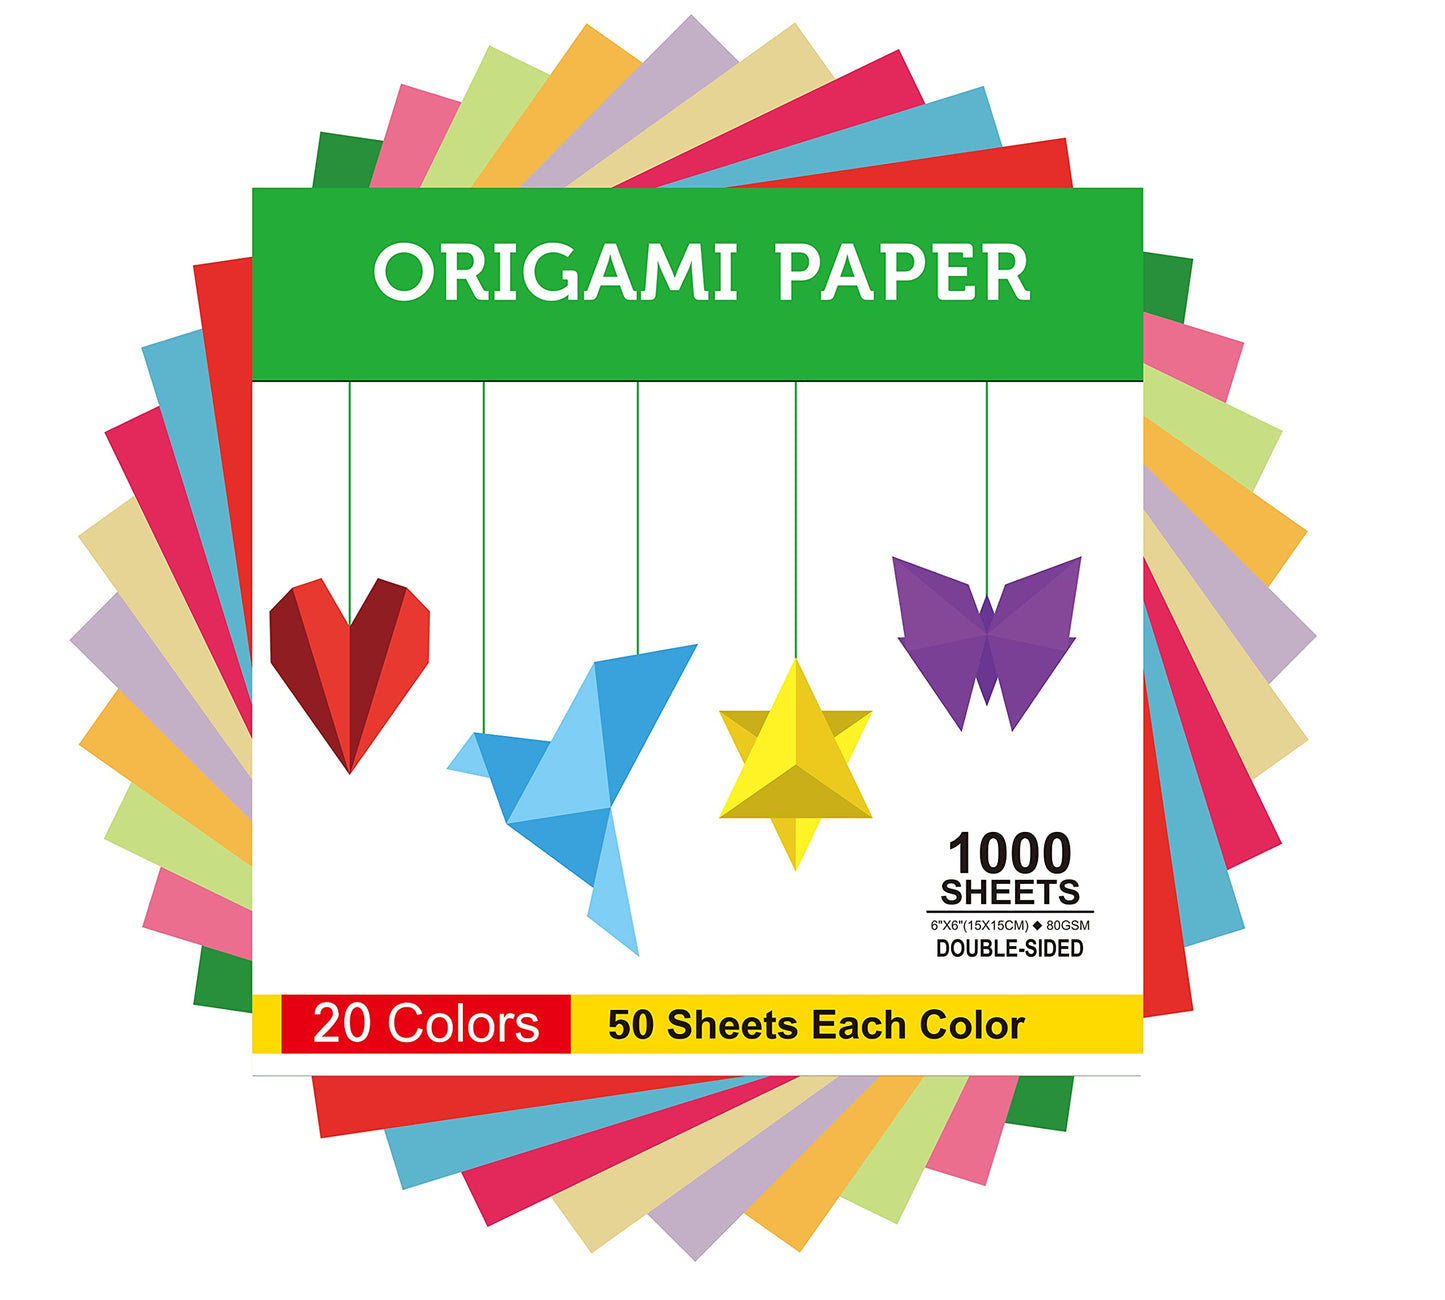 BUBU Origami Paper Kit 1000 Sheets 6 Inch Square Double Sided Color 20 Vivid Colors for Beginners Trainning and School Craft Lessons